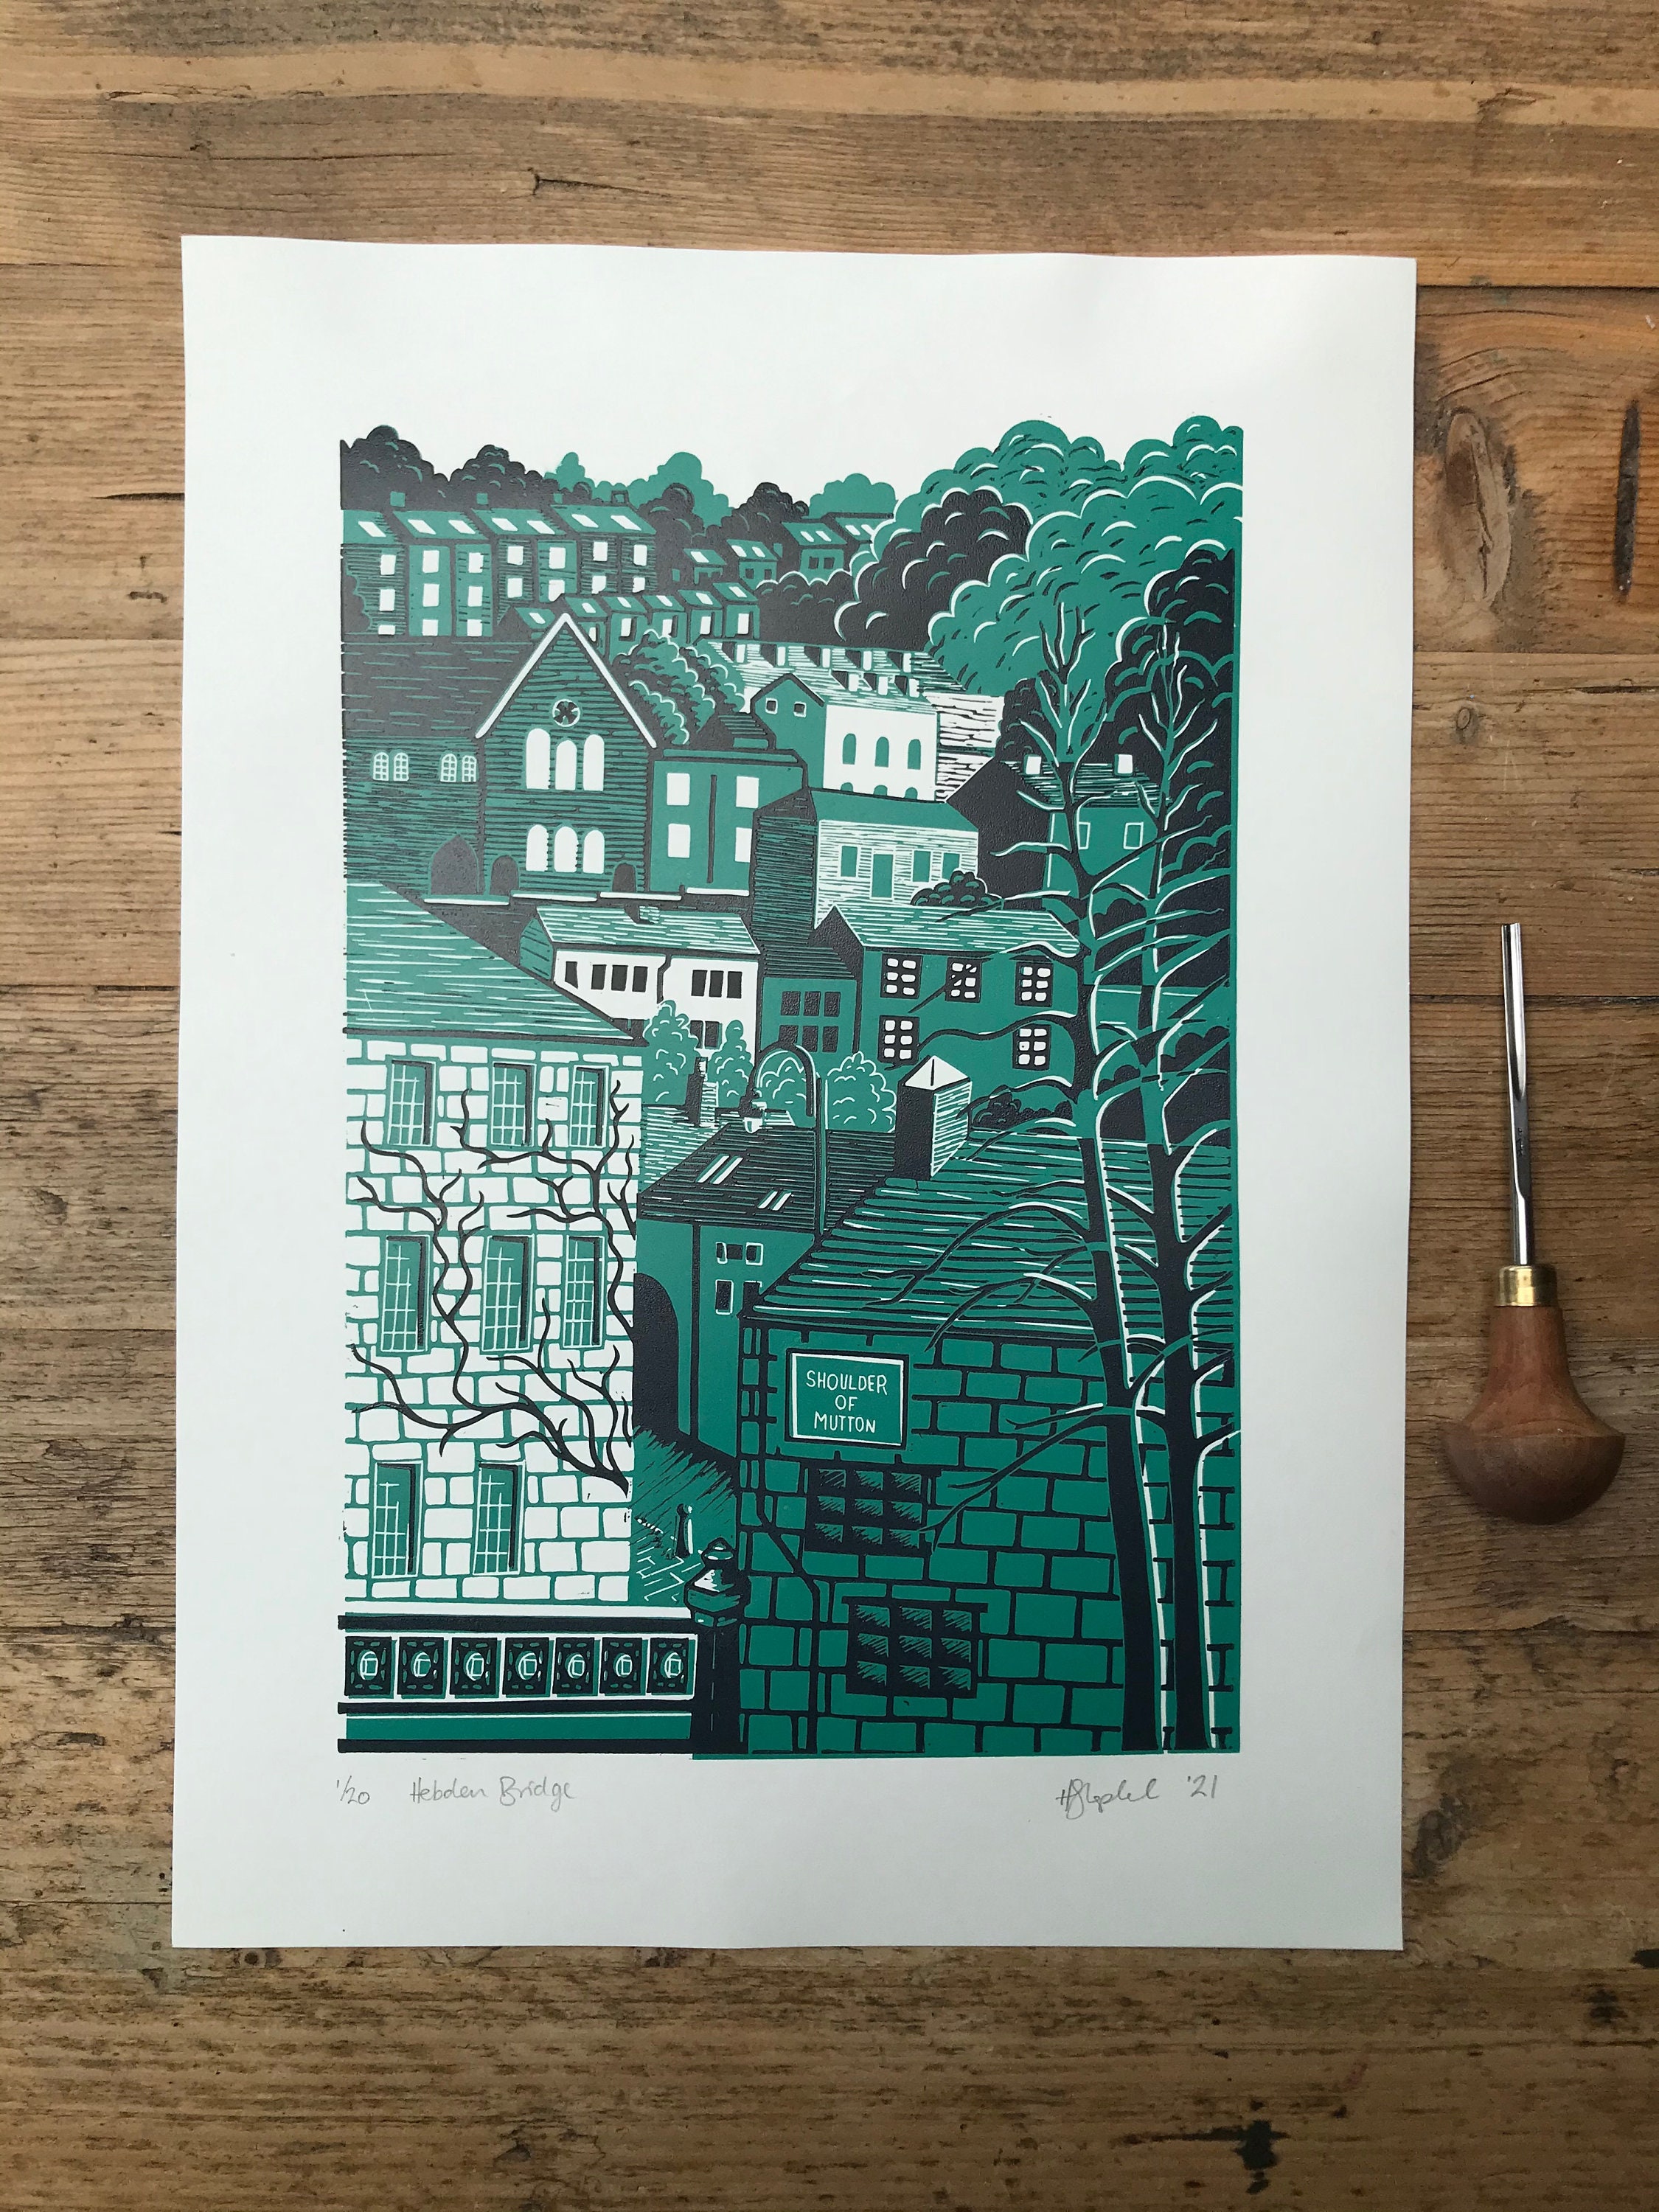 Lino Print of the ticket office at Hebden Bridge Picture House in Yorkshire on Japanese HoSho Paper